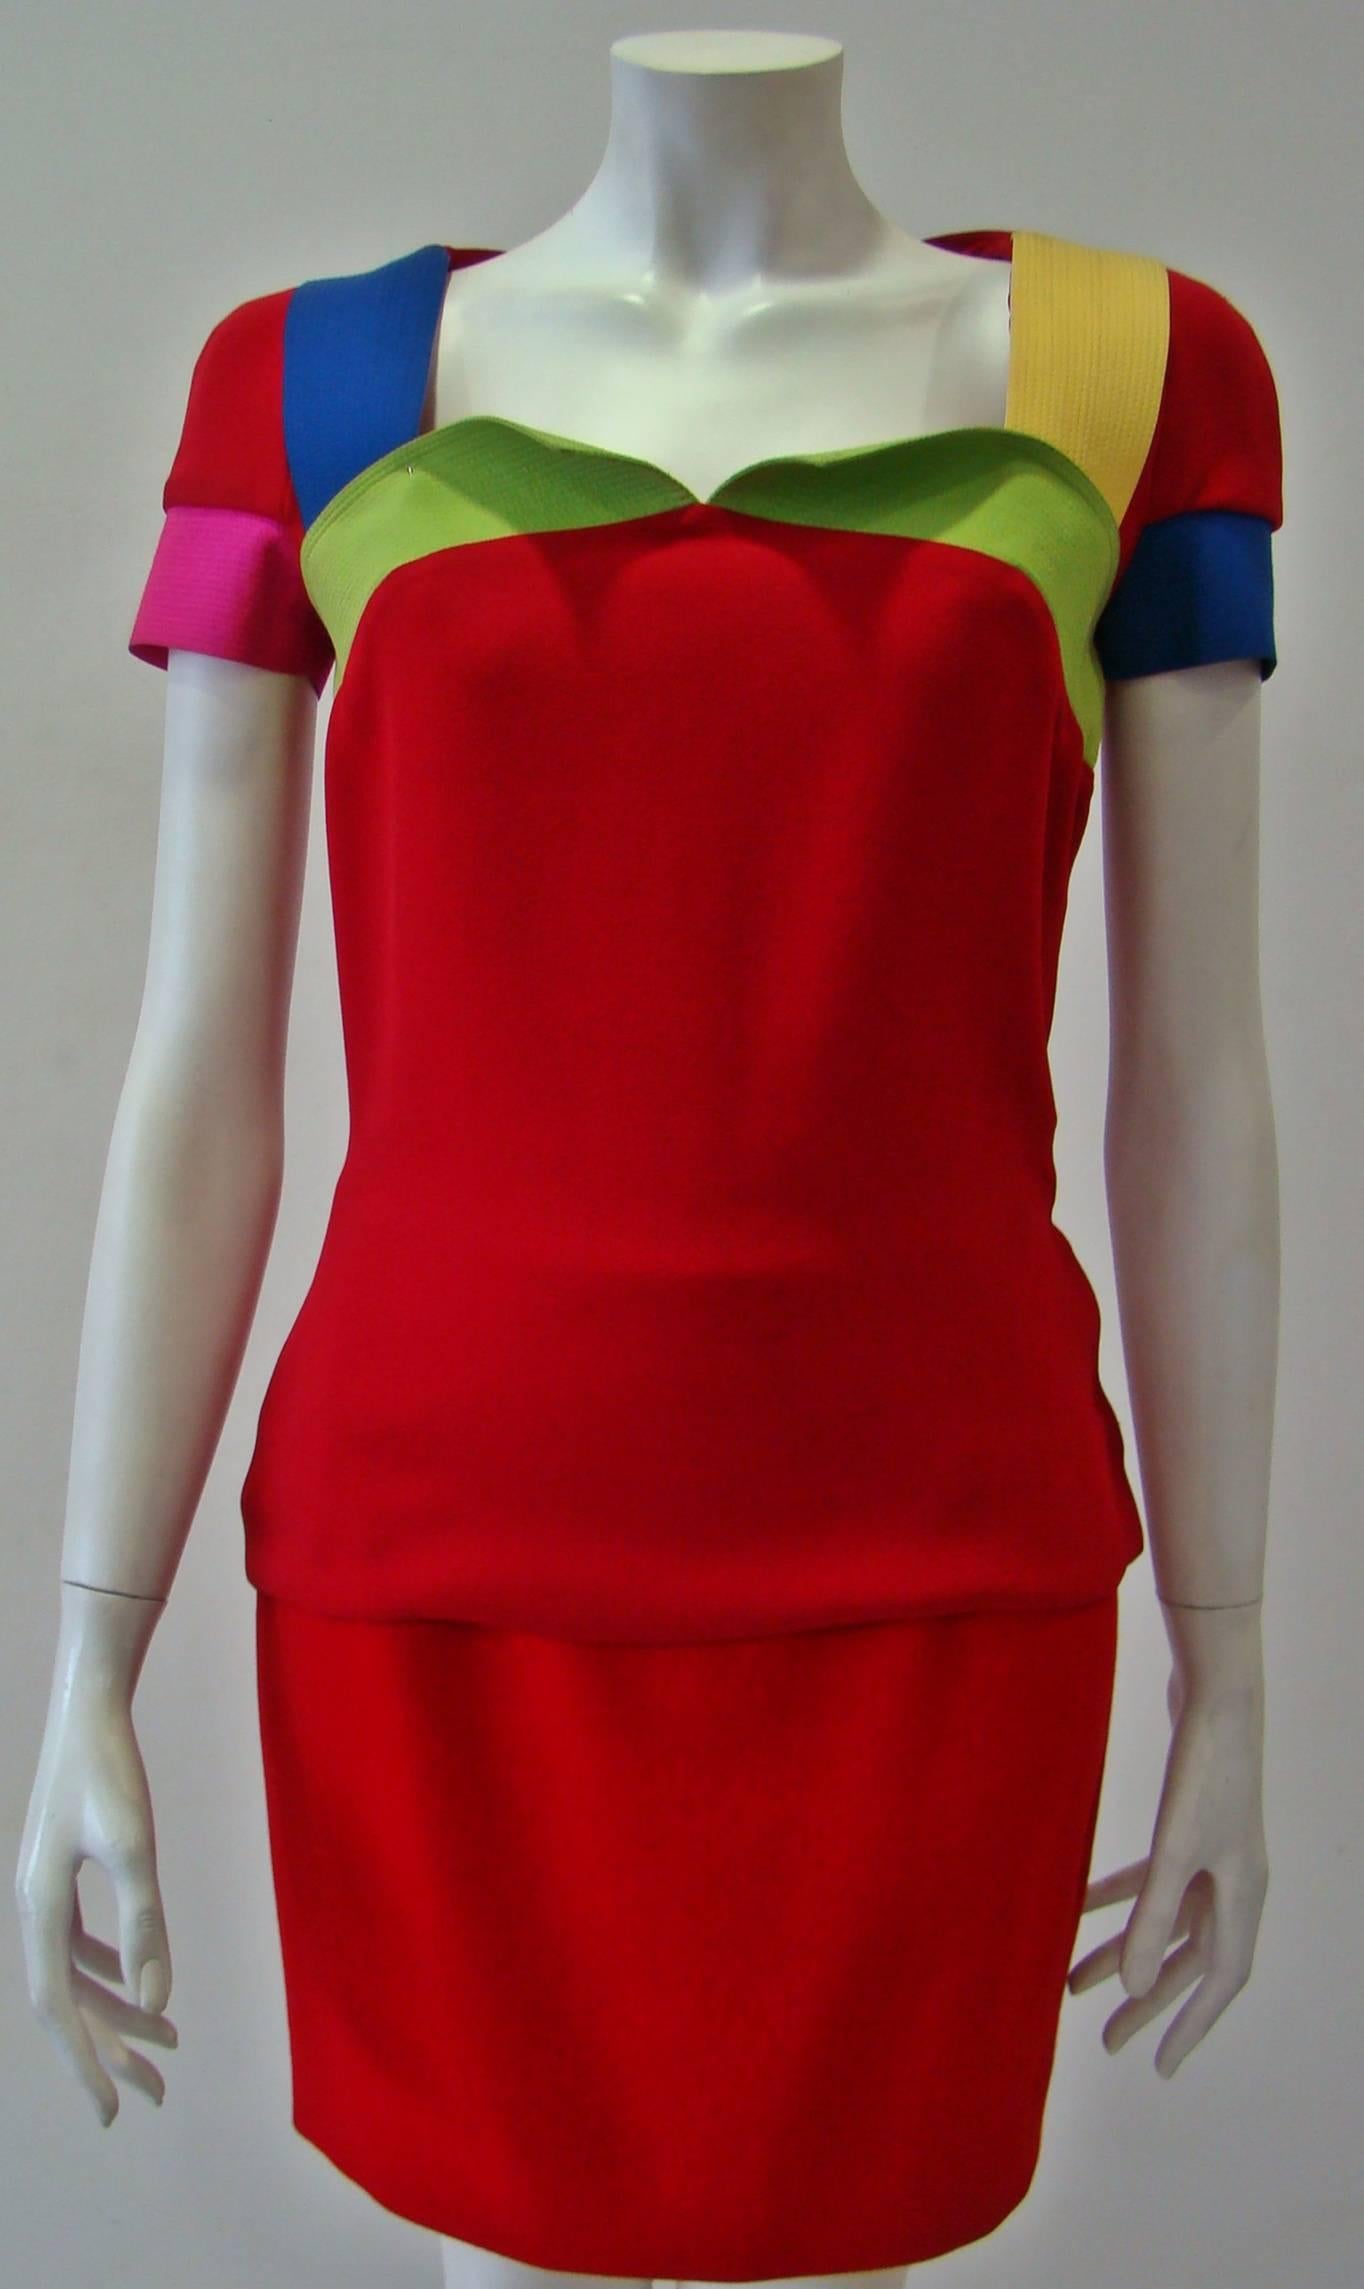 An Elegant Color Block Tunic. 100%Silk Top Featuring Short Sleeves, A Square Neck And A Concealed Zip Fastening At Side. Wear It With A Mini Skirt And High Heels And Be Wonderful.